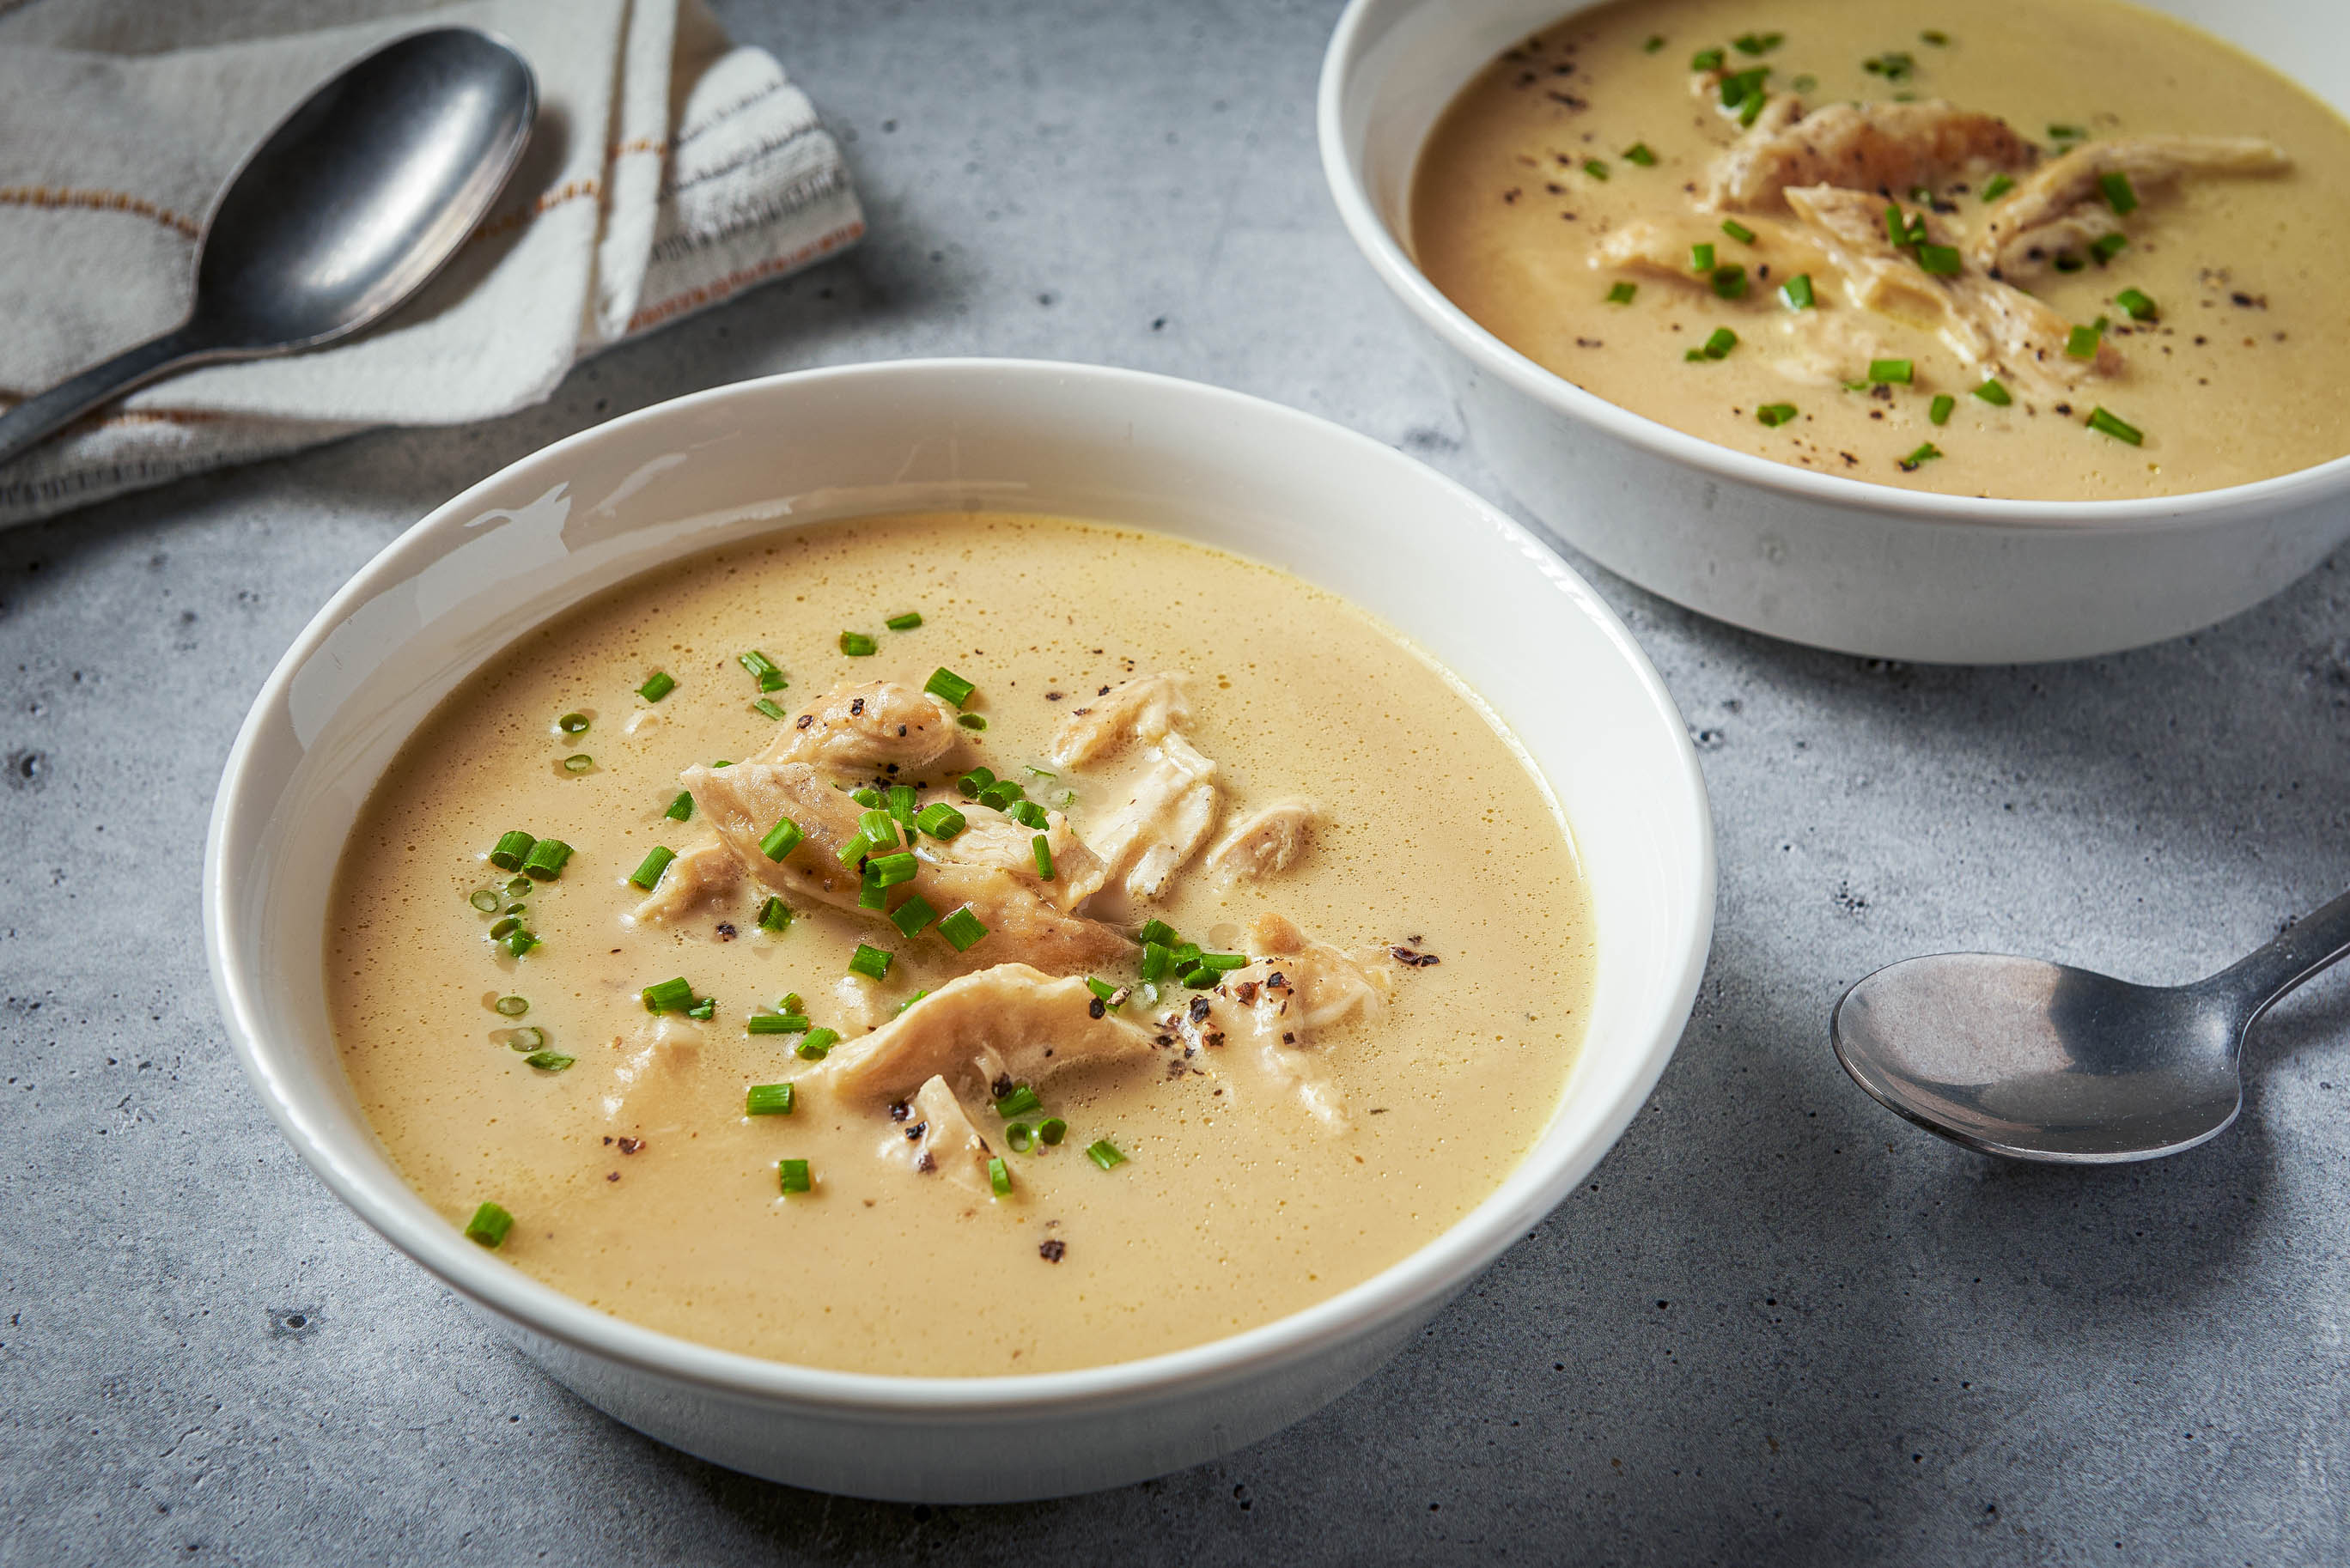 French onion meets chicken soup in this creamy bowl of comfort

